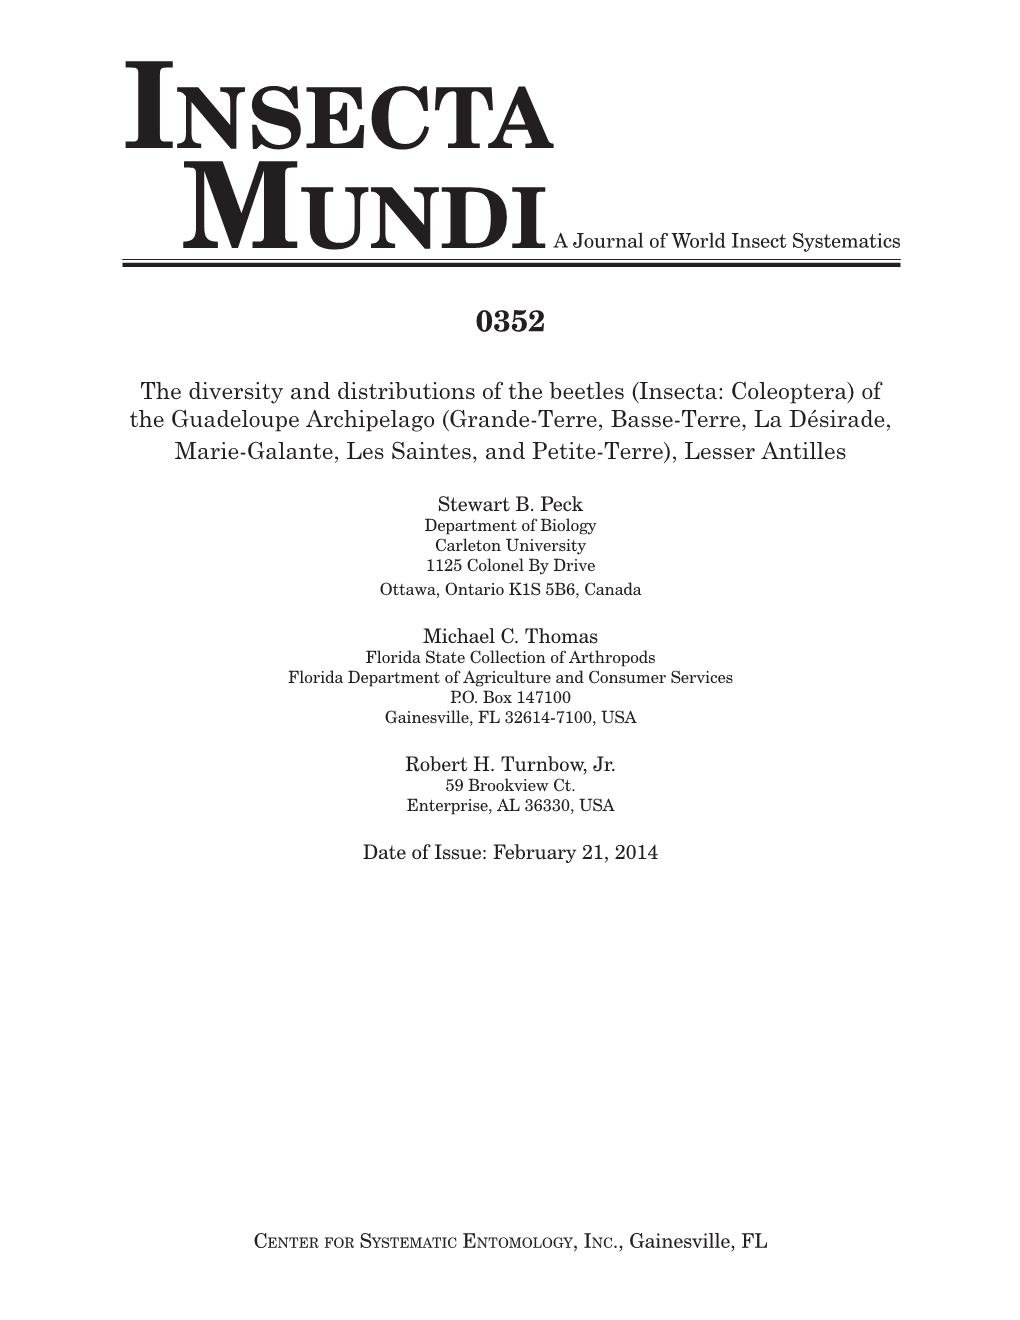 INSECTA MUNDIA Journal of World Insect Systematics